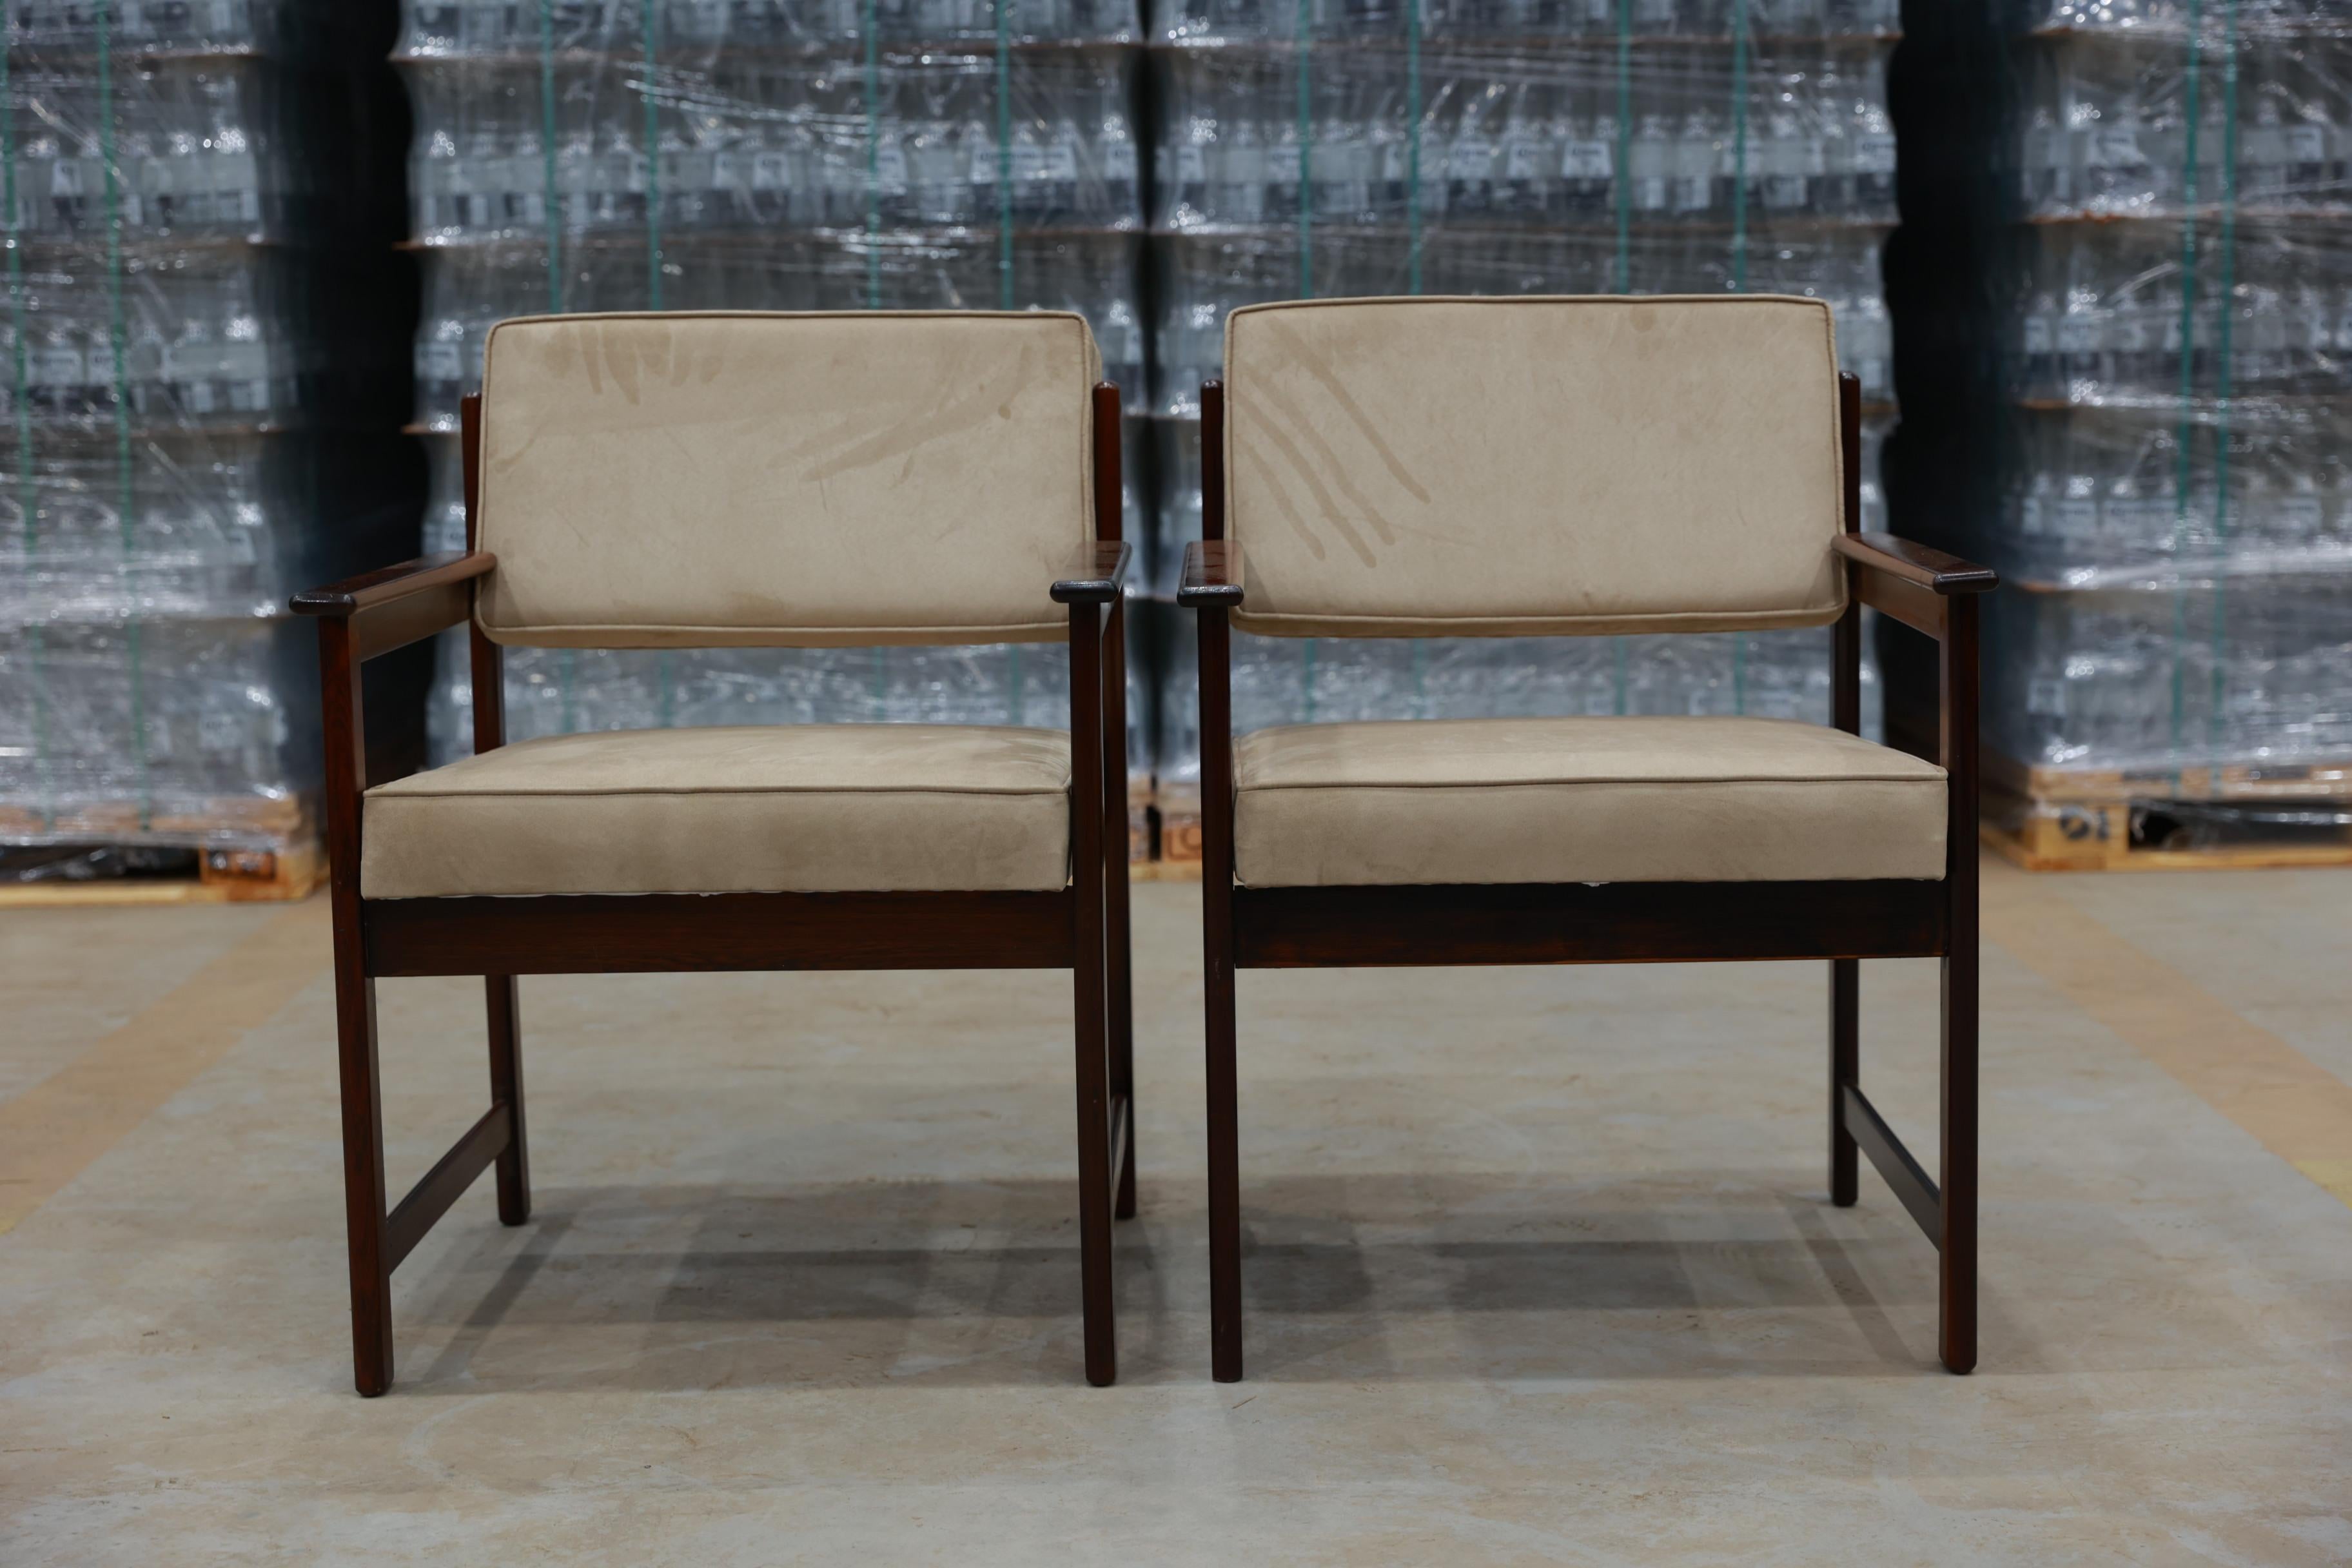 Mid-Century Modern Midcentury Modern Armchairs in Hardwood & Beige Fabric by Jorge Jabour, Brazil For Sale